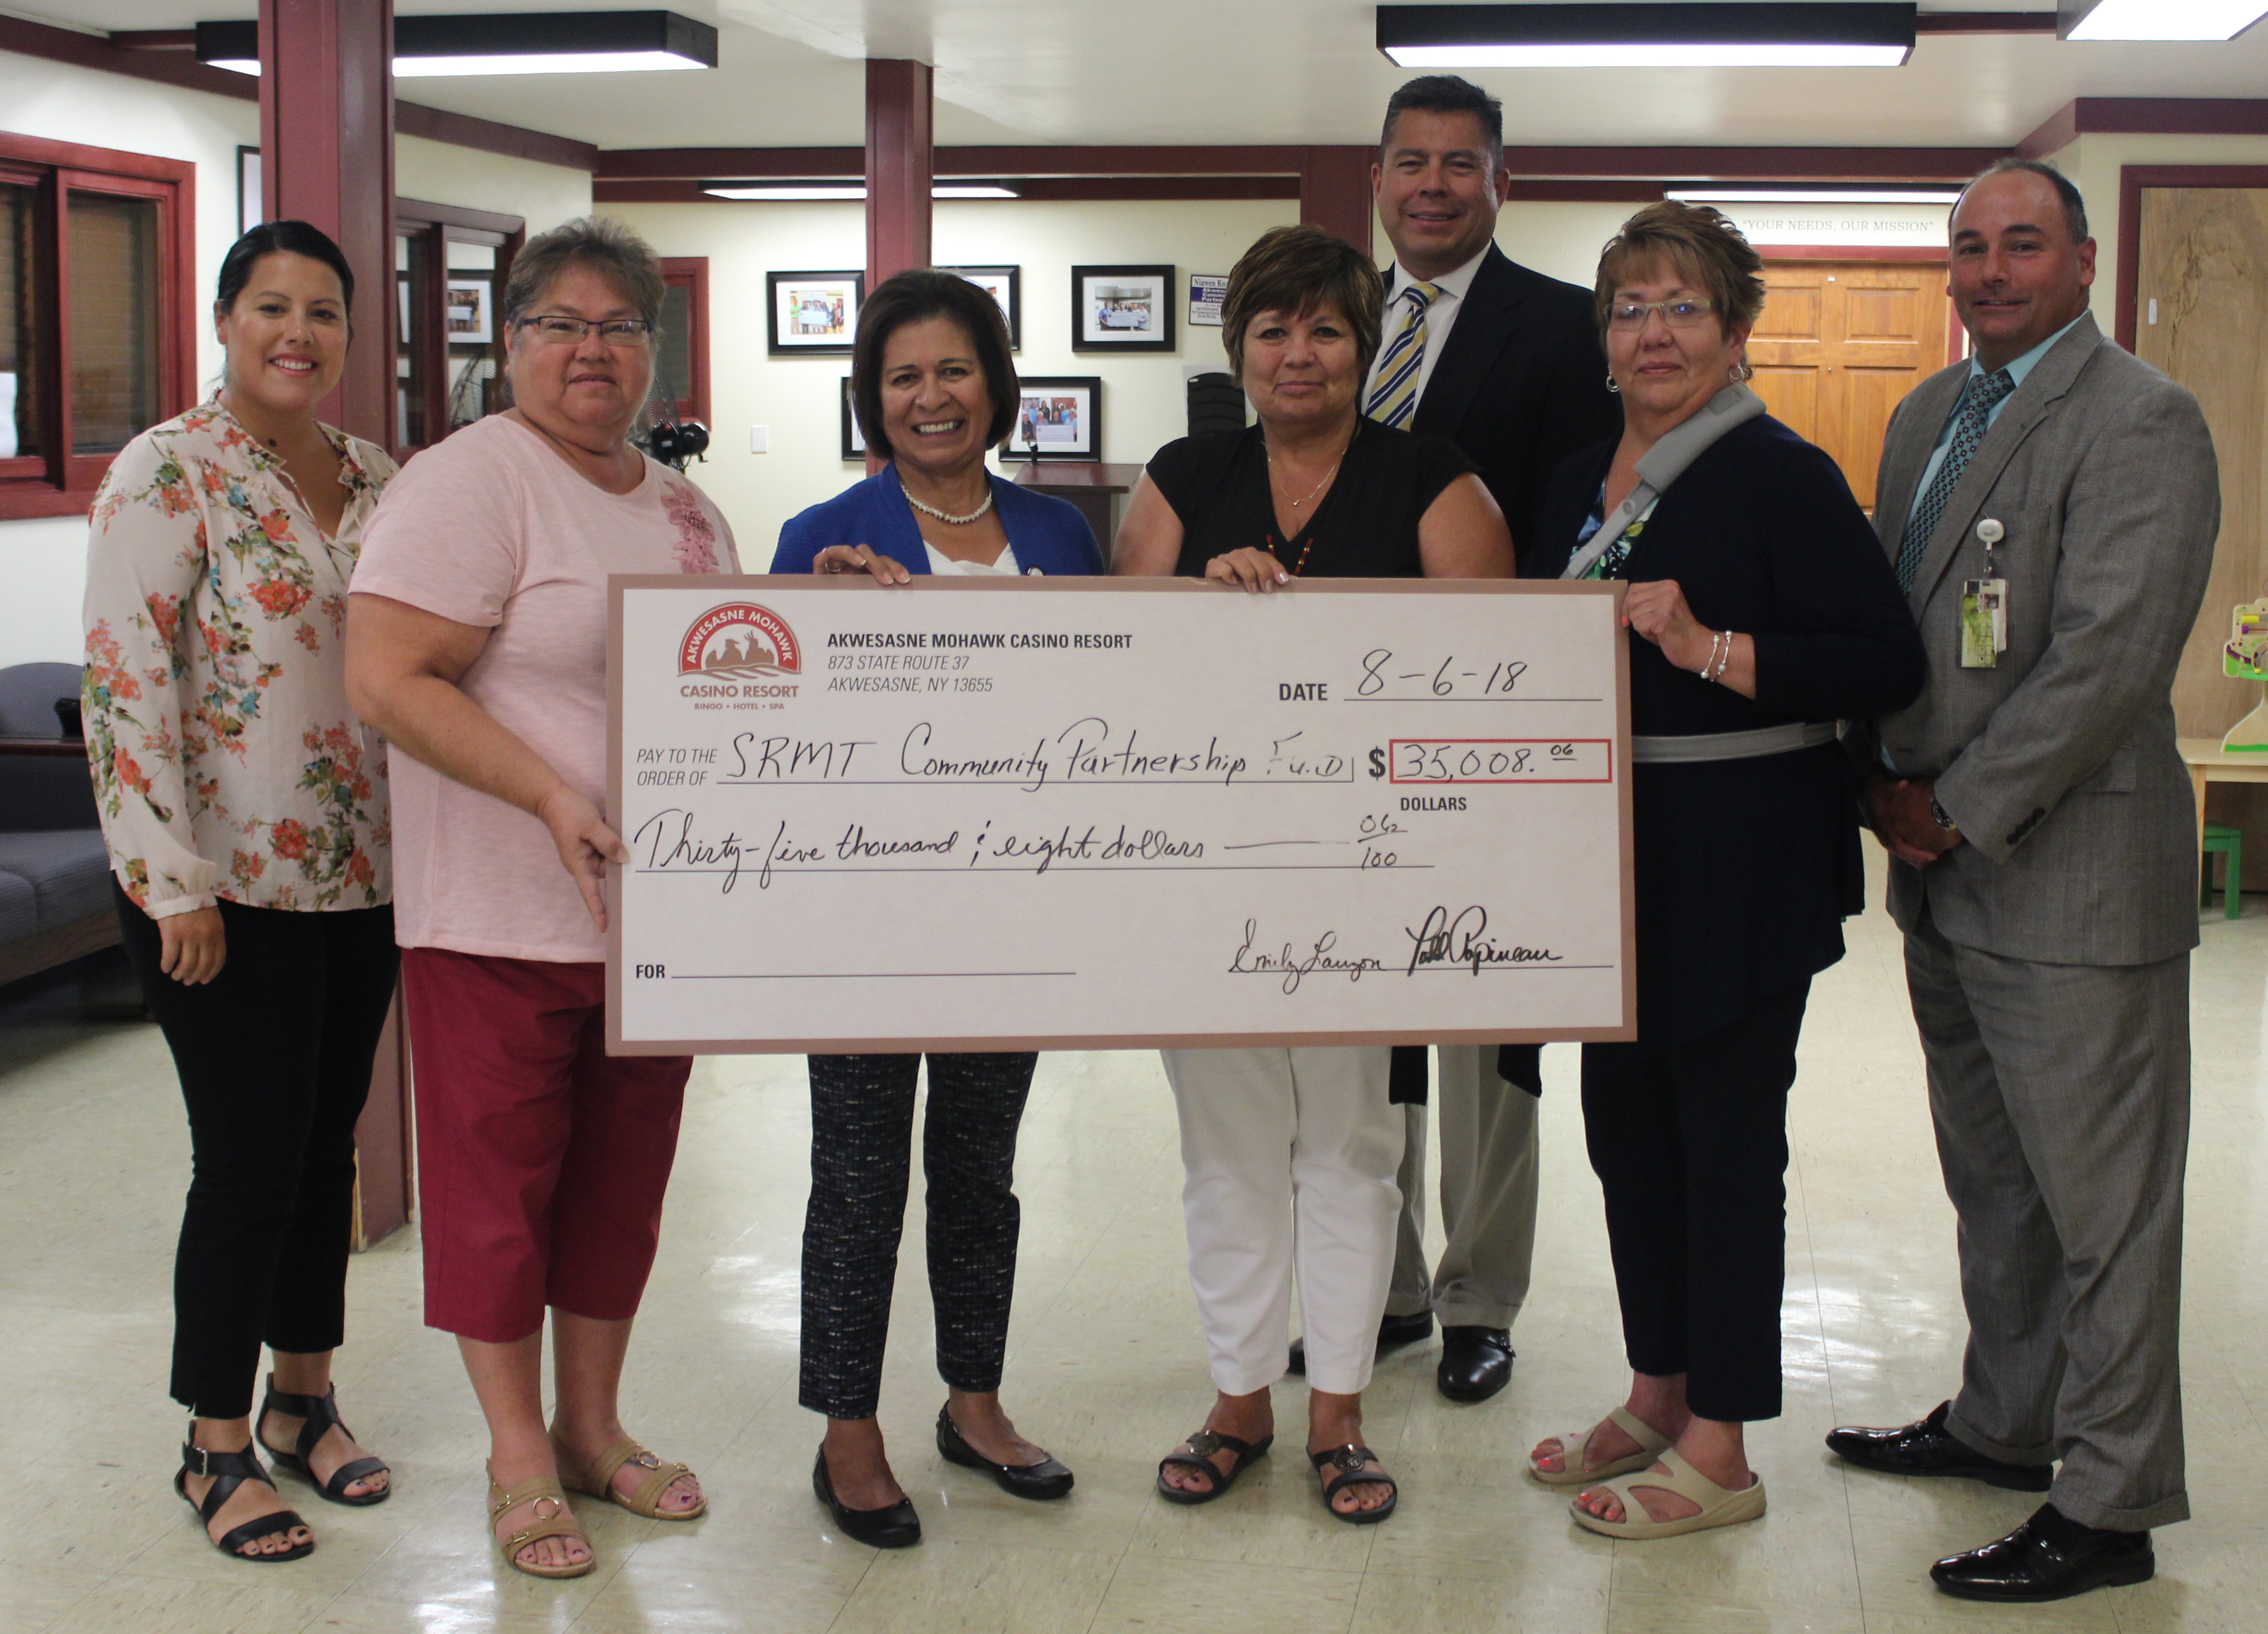 Akwesasne Mohawk Casino Resort deliver checks to recipients of their first annual golf fundraising event